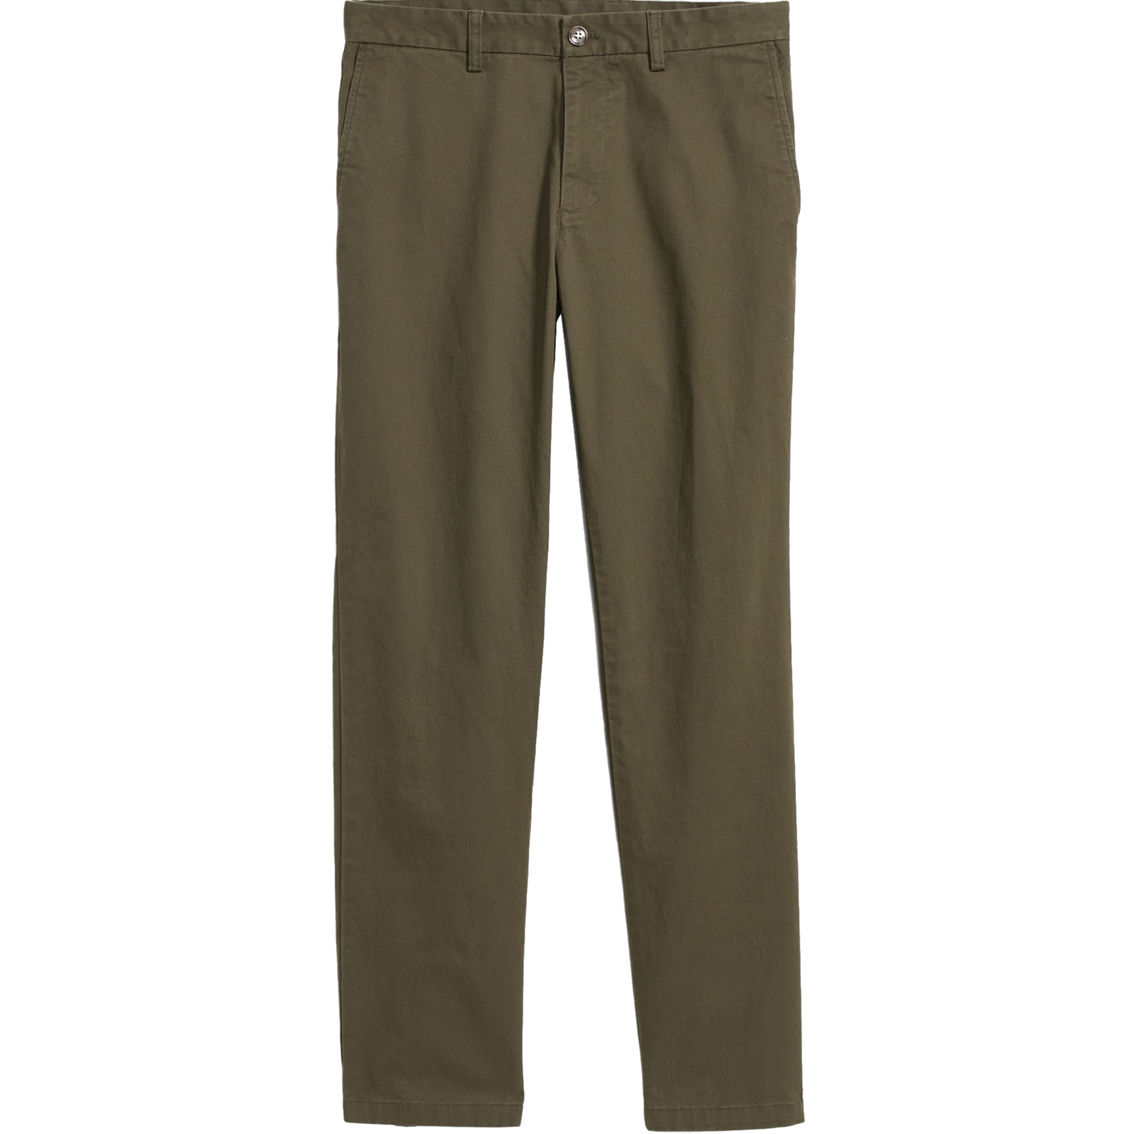 Old Navy Rotation Straight Chino Pants | Pants | Clothing & Accessories ...